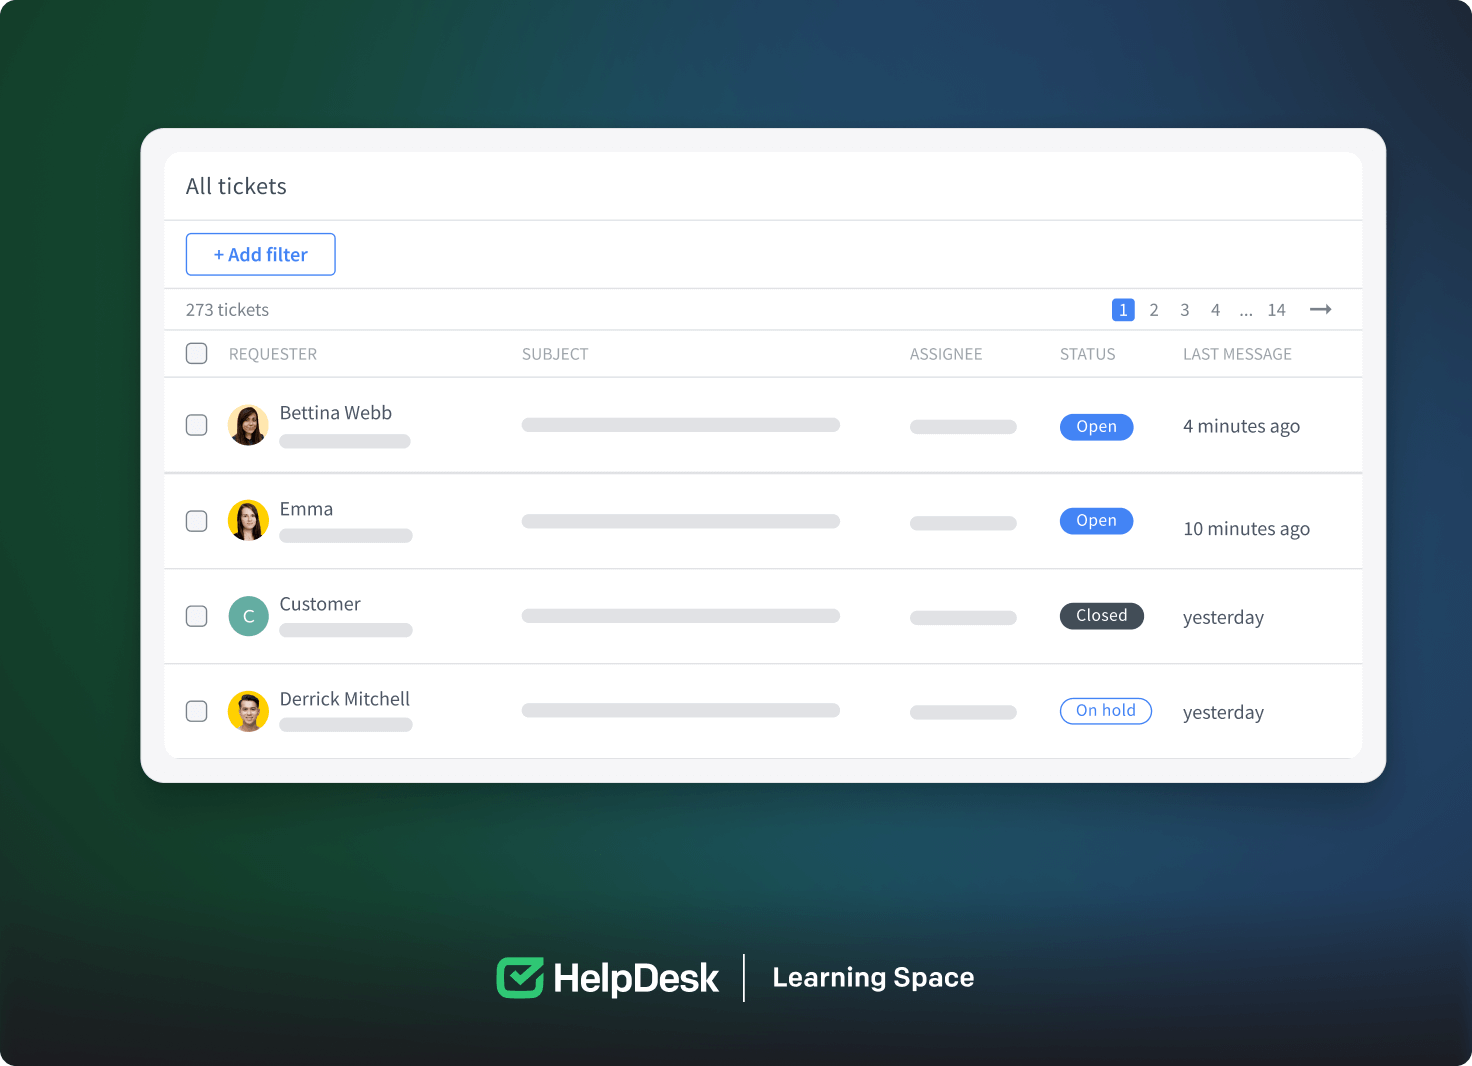 Utilizing page navigation on the main dashboard in the HelpDesk App